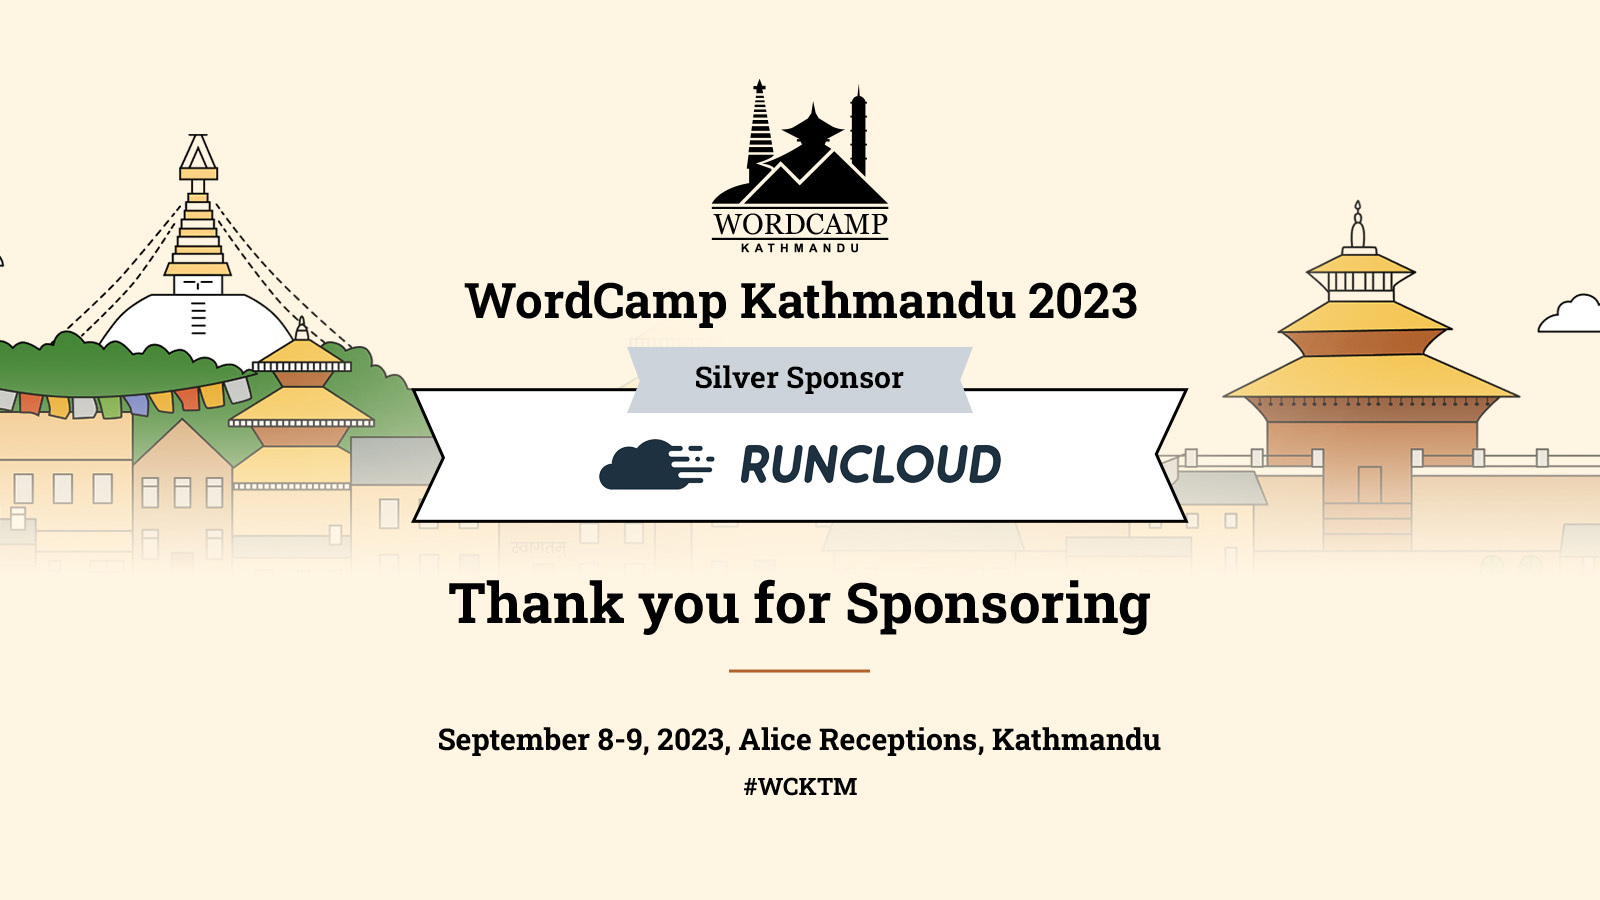 Thank you RunCloud for sponsoring